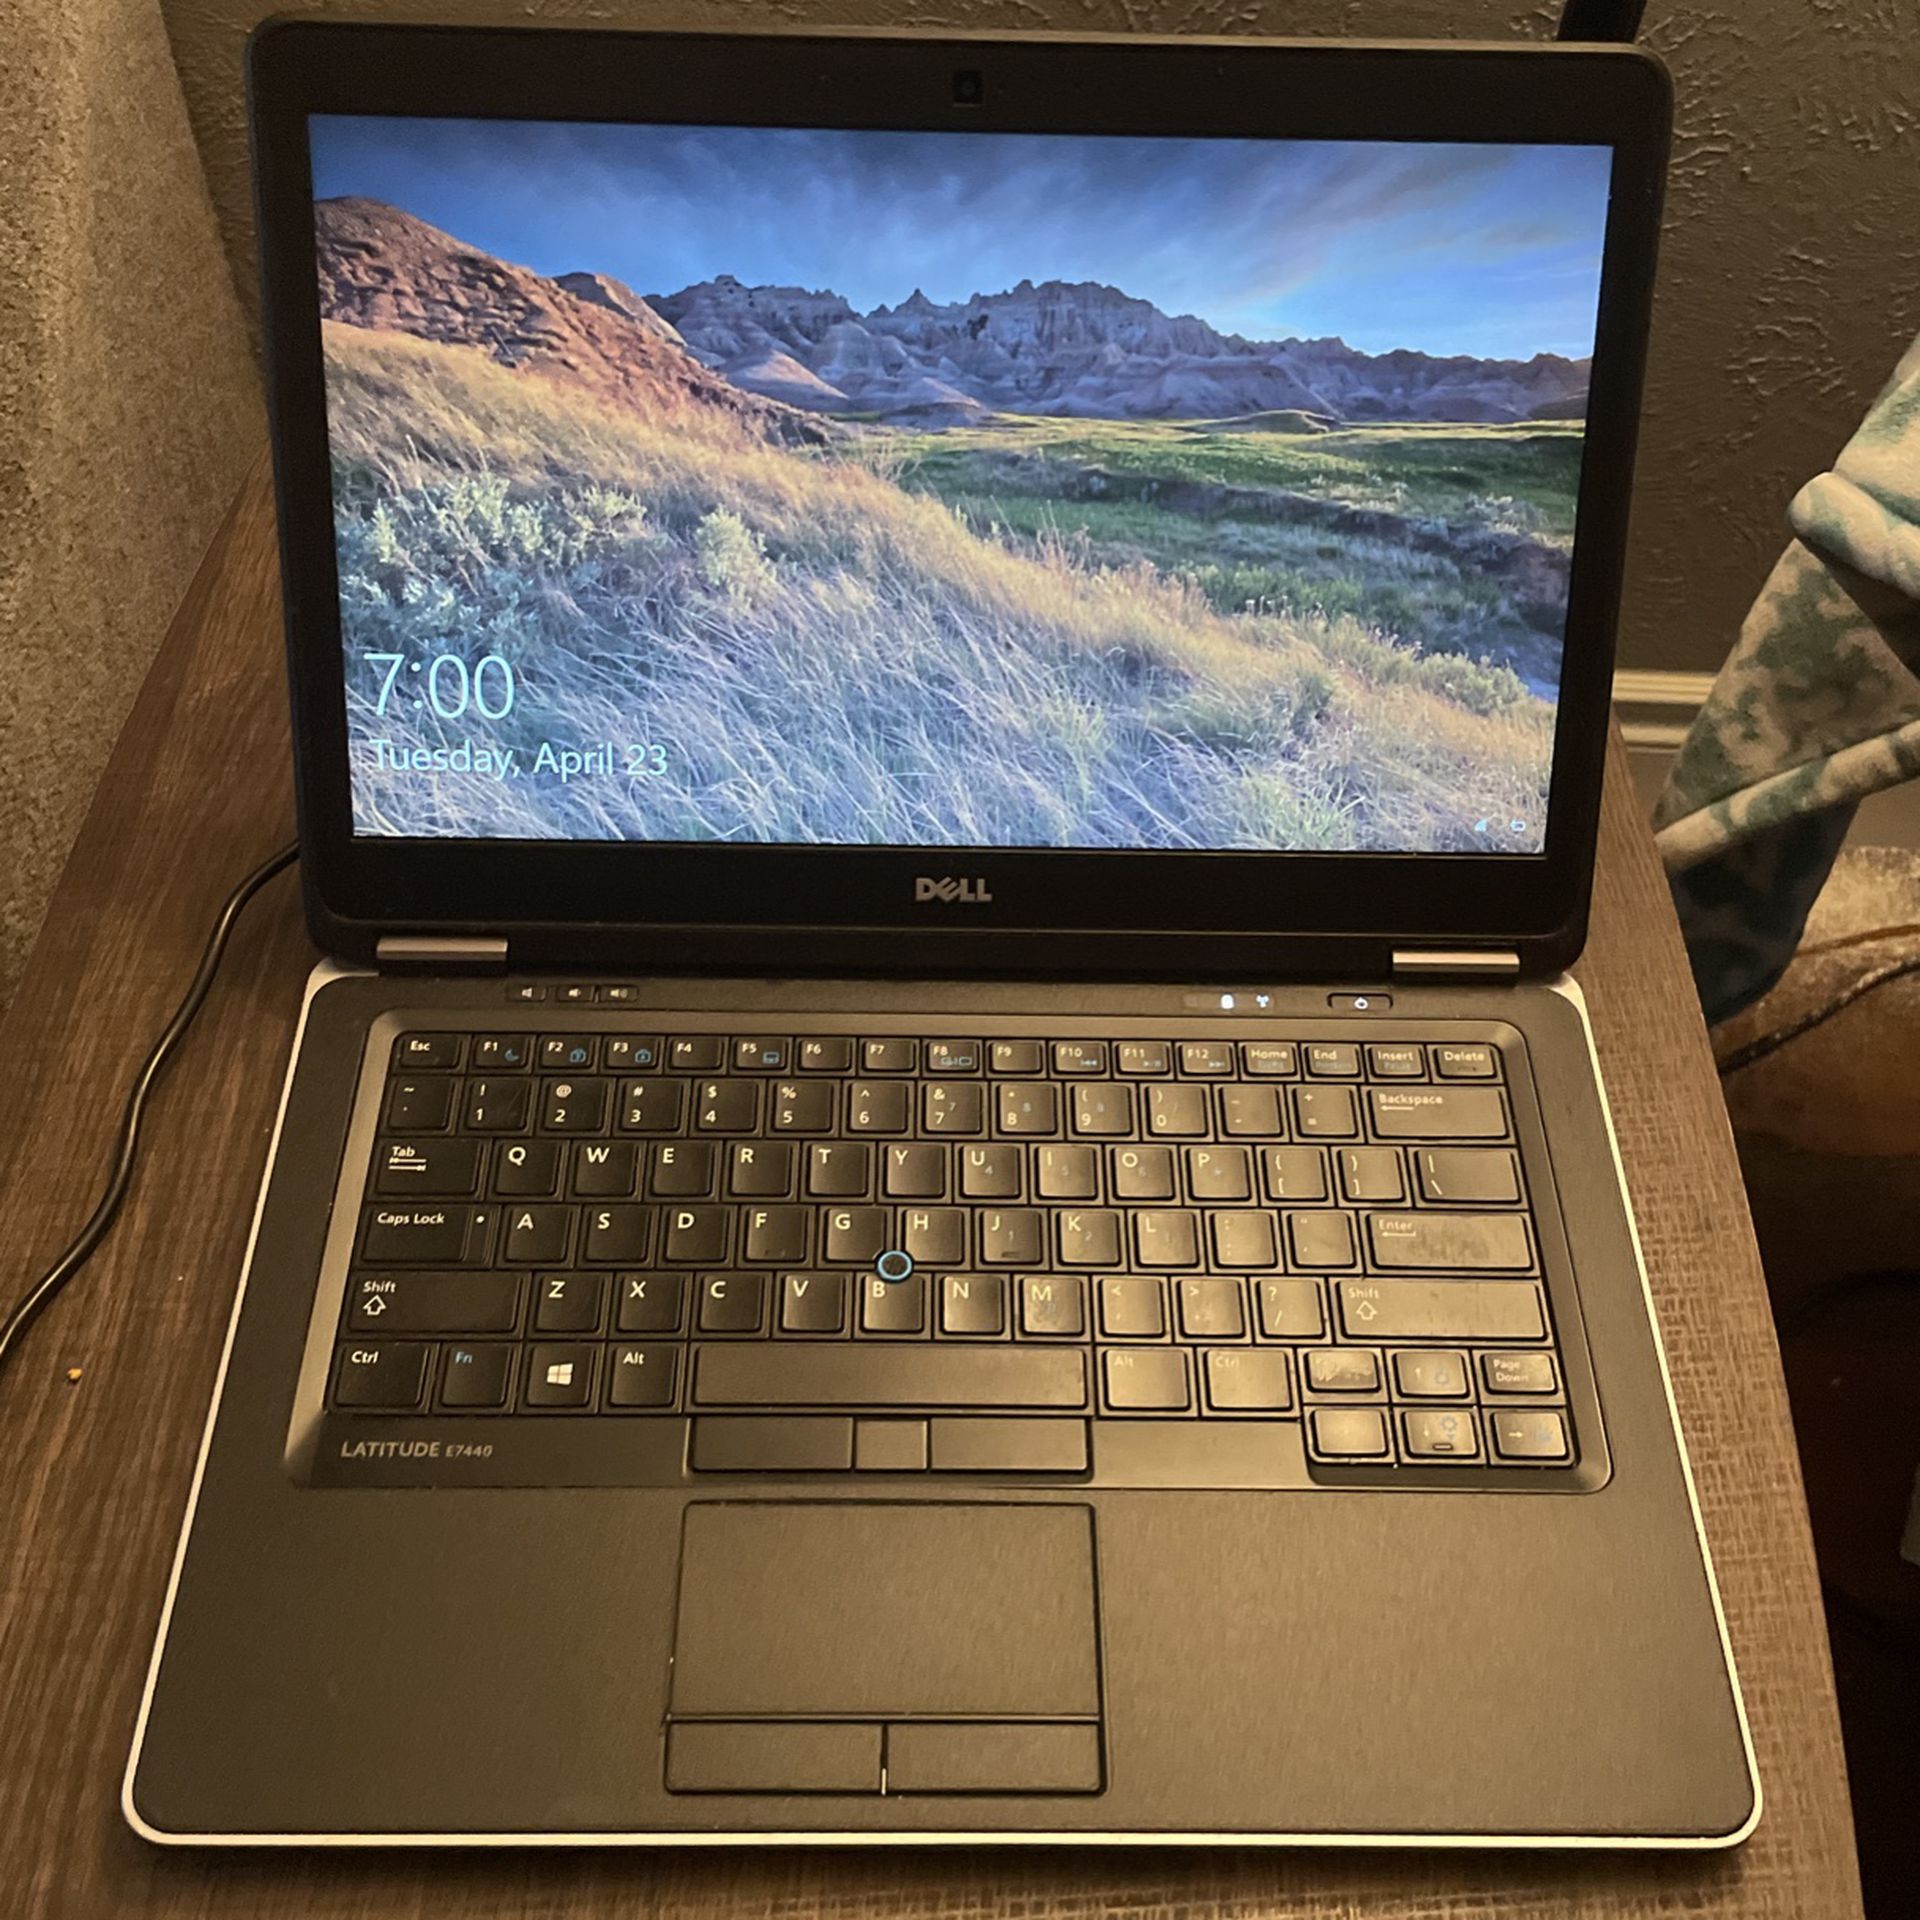 DELL Latitude E7440 (charger Included)